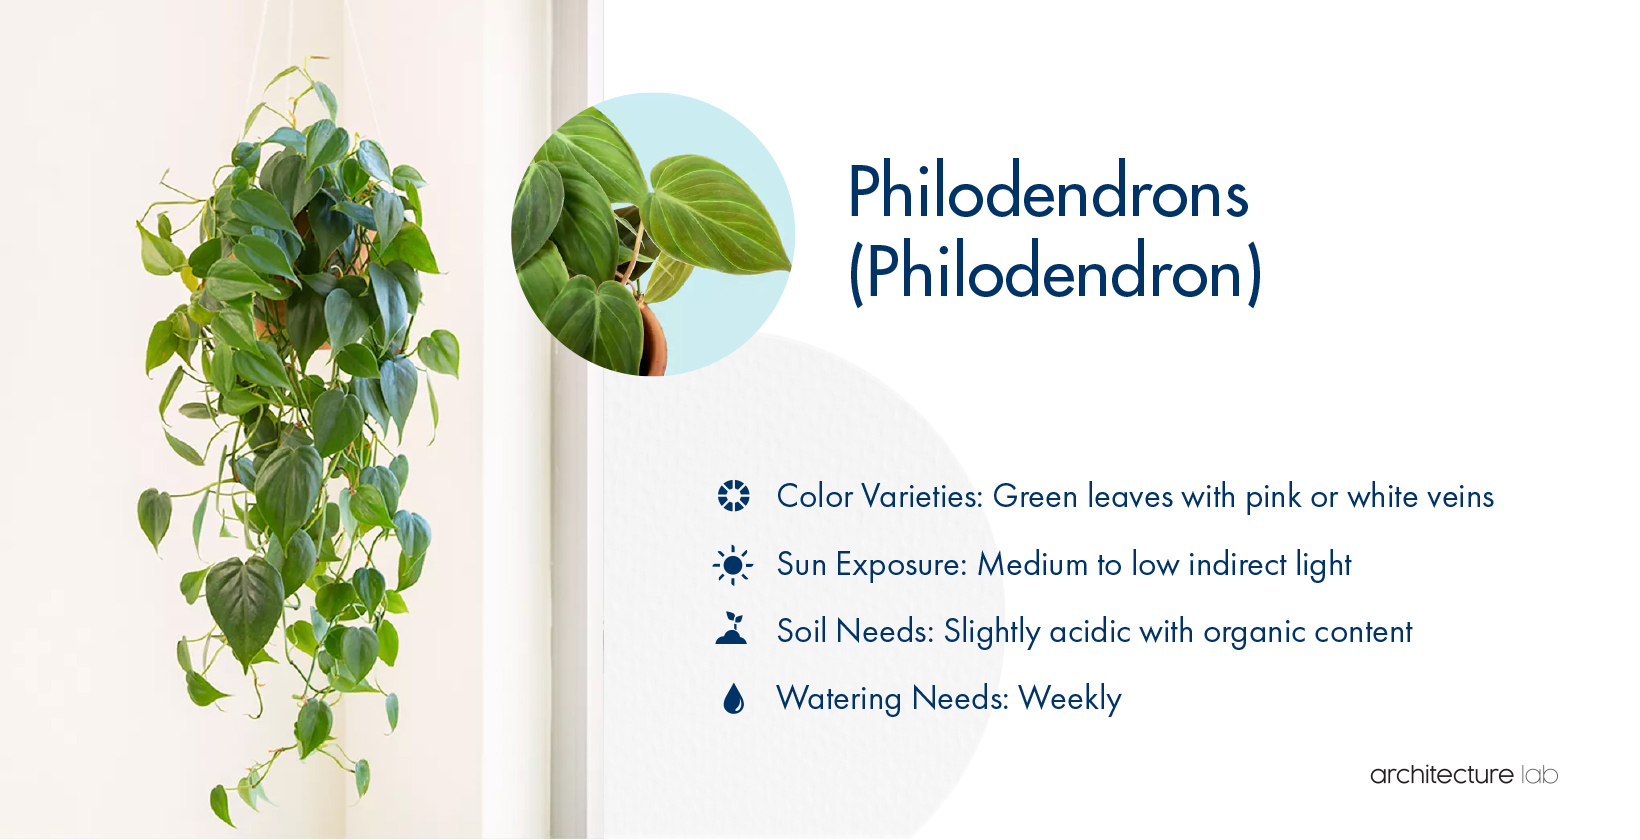 15. Philodendrons (philodendron)